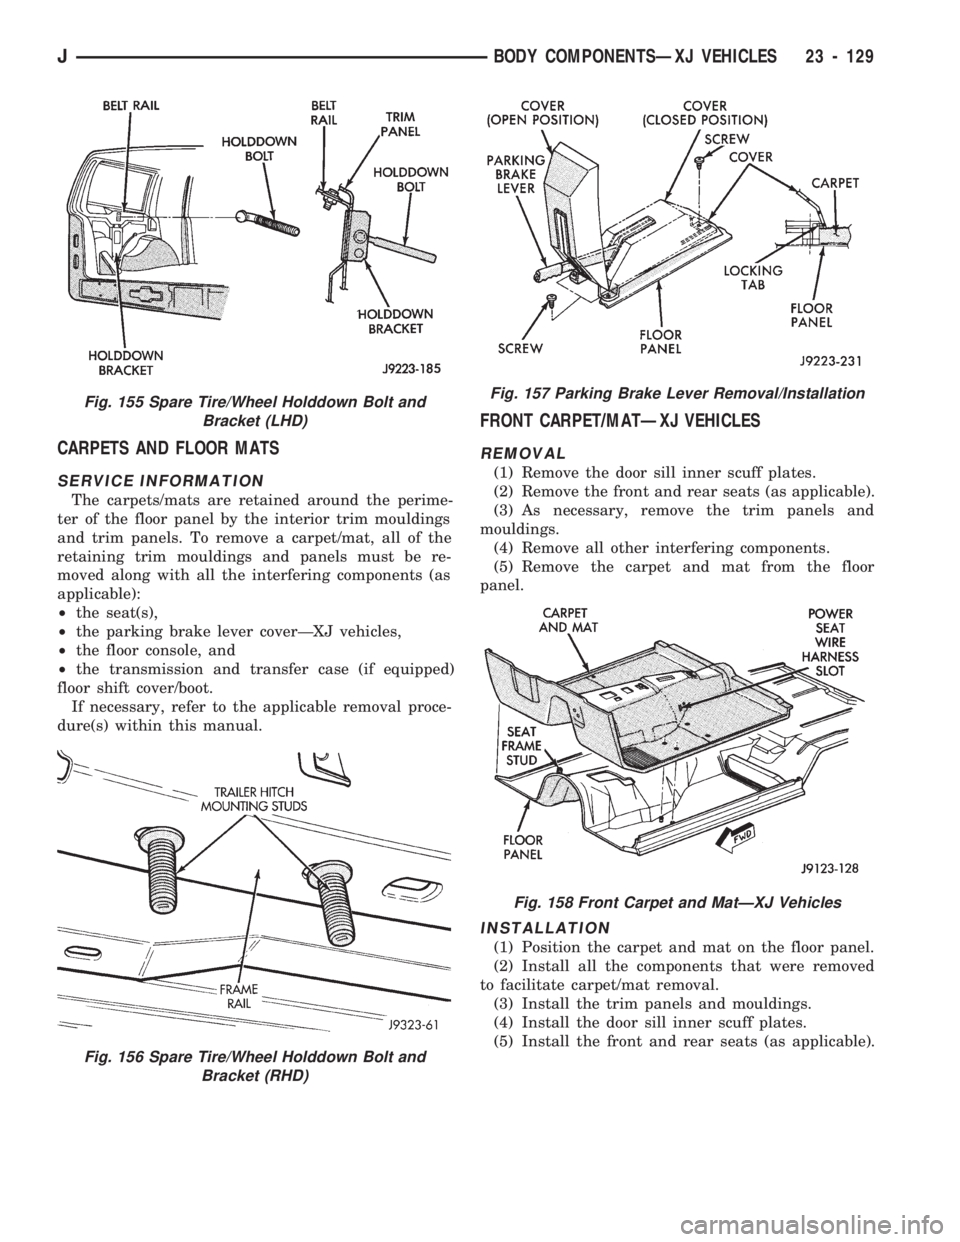 JEEP CHEROKEE 1994  Service Repair Manual CARPETS AND FLOOR MATS
SERVICE INFORMATION
The carpets/mats are retained around the perime-
ter of the floor panel by the interior trim mouldings
and trim panels. To remove a carpet/mat, all of the
re